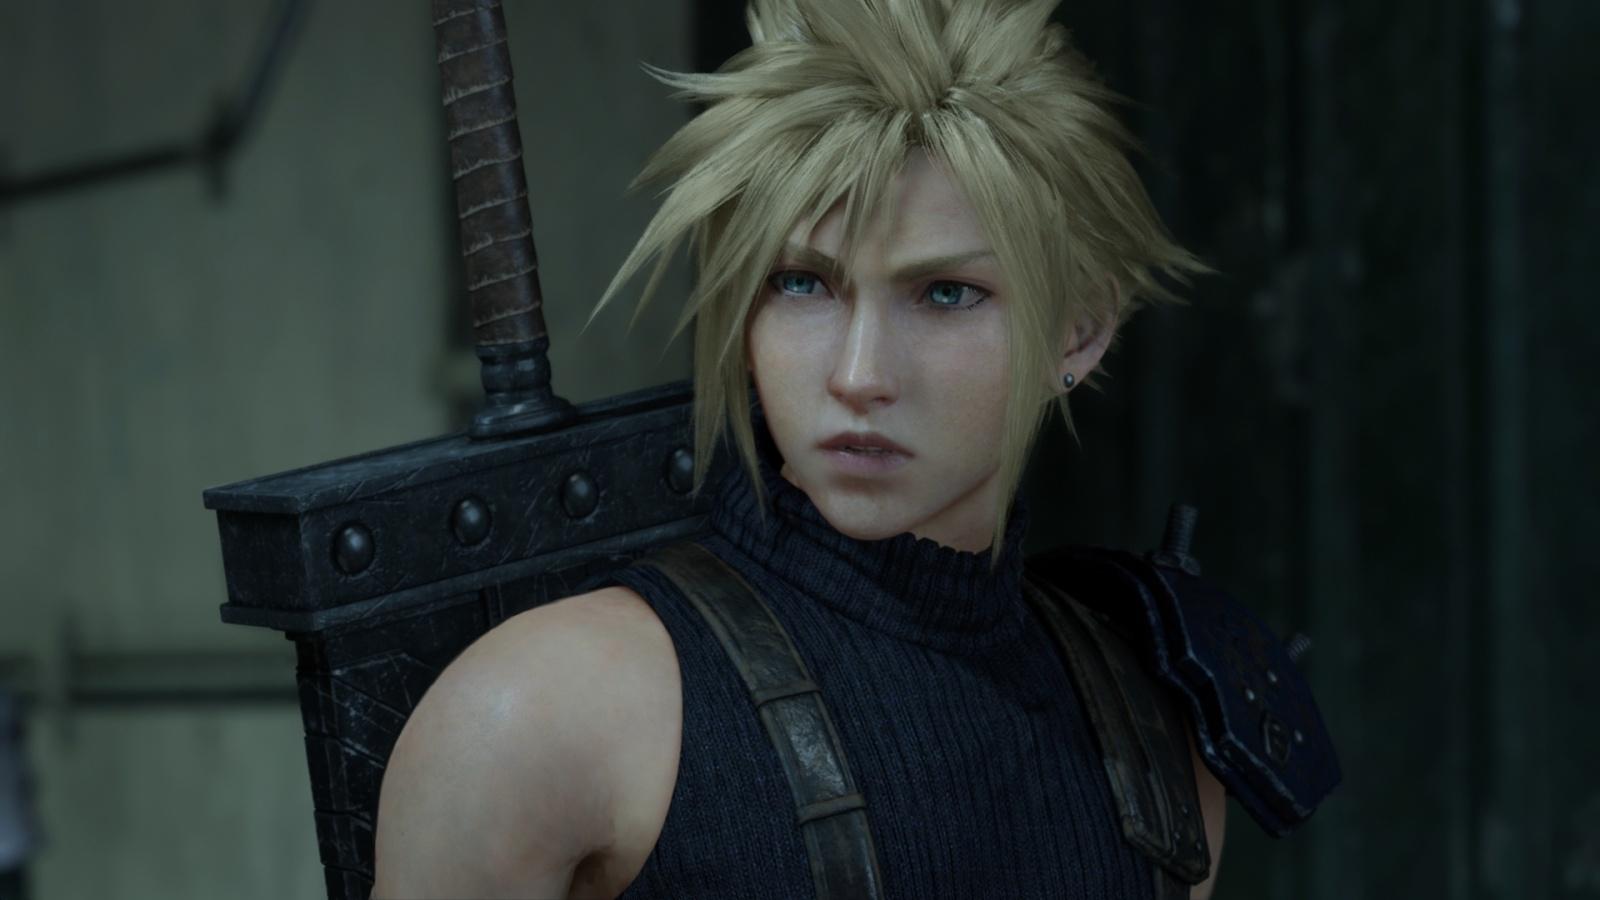 Microsoft Says Final Fantasy XVI and Silent Hill 2/FFVII Remakes